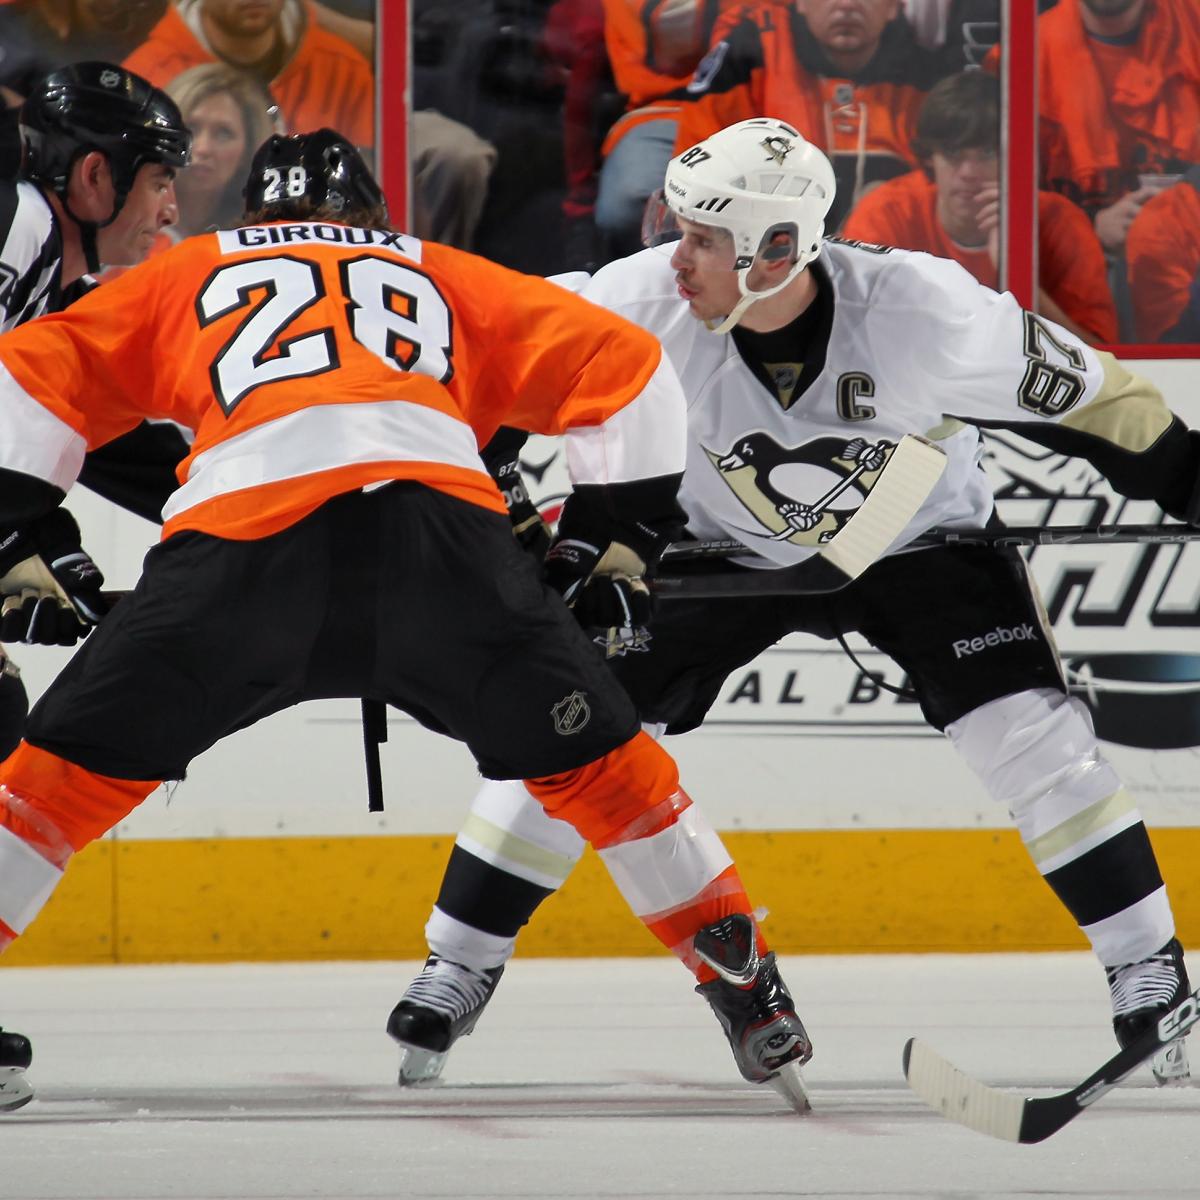 Philadelphia Flyers vs. Pittsburgh Penguins: Top 10 Intrastate Rivalry  Moments, News, Scores, Highlights, Stats, and Rumors